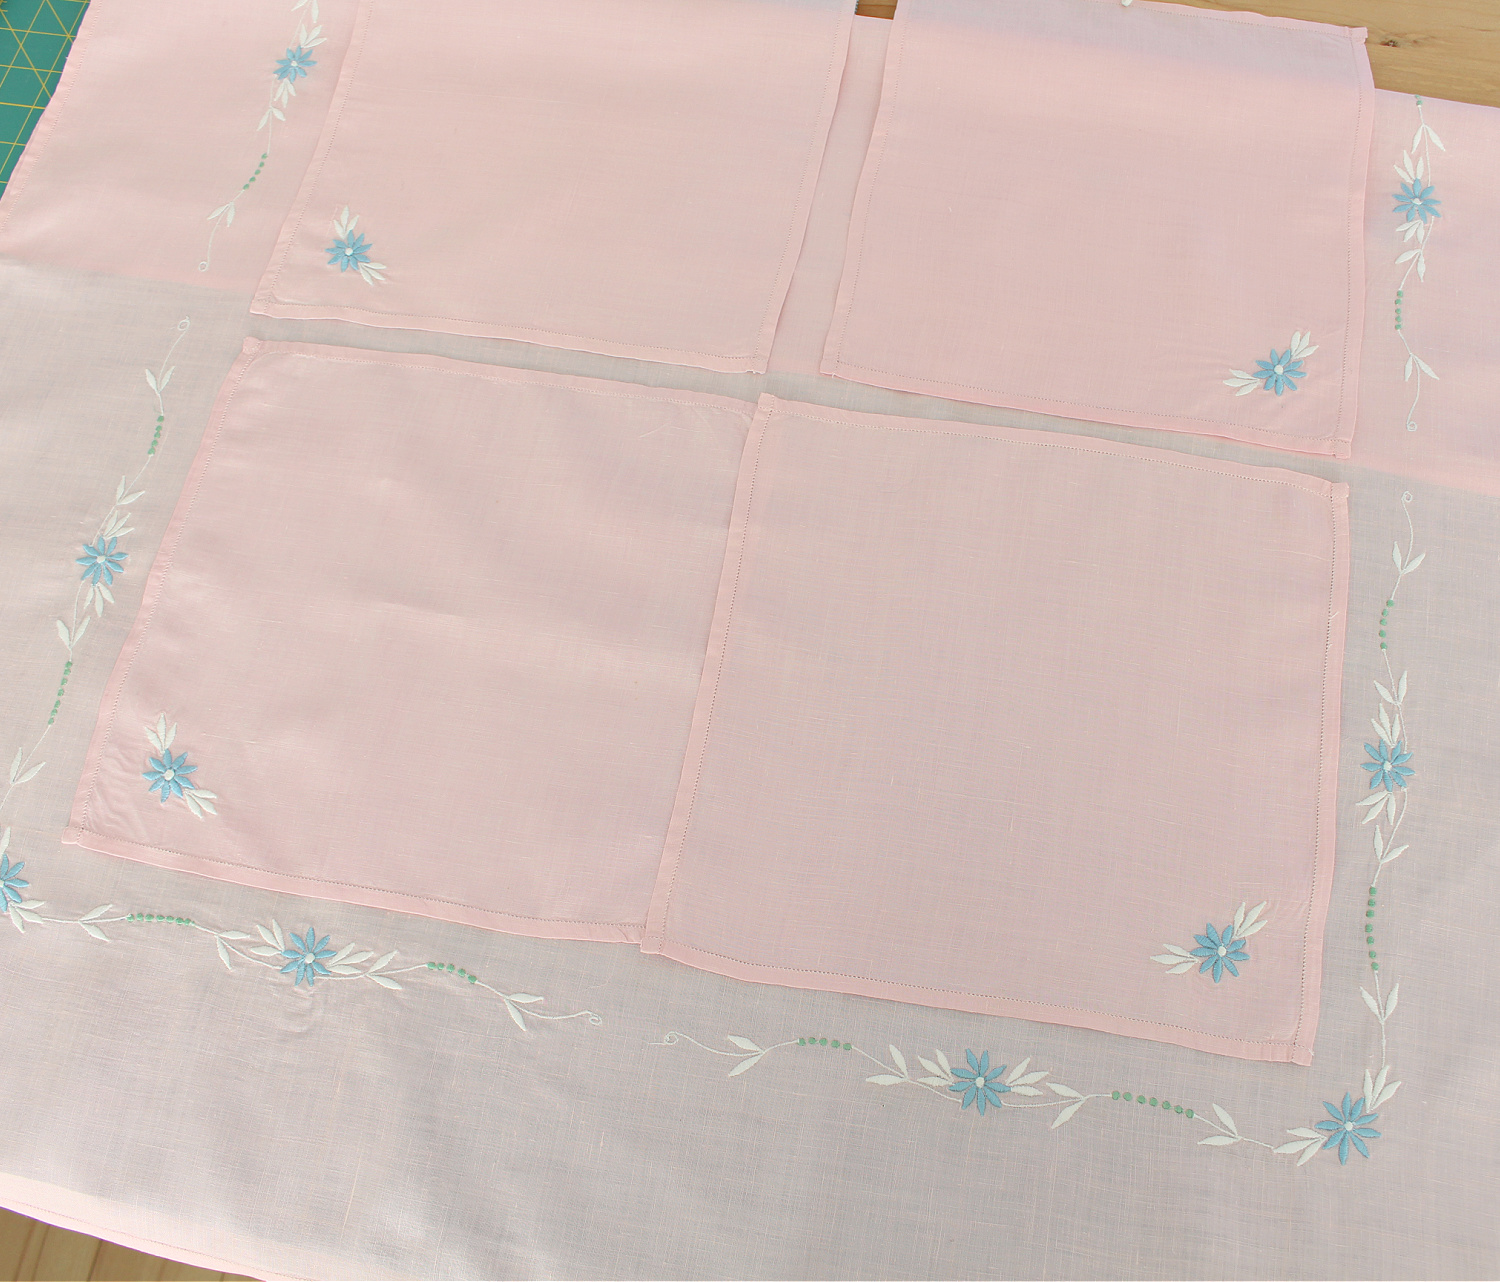 Upcycle a Tablecloth into an Apron with Pockets